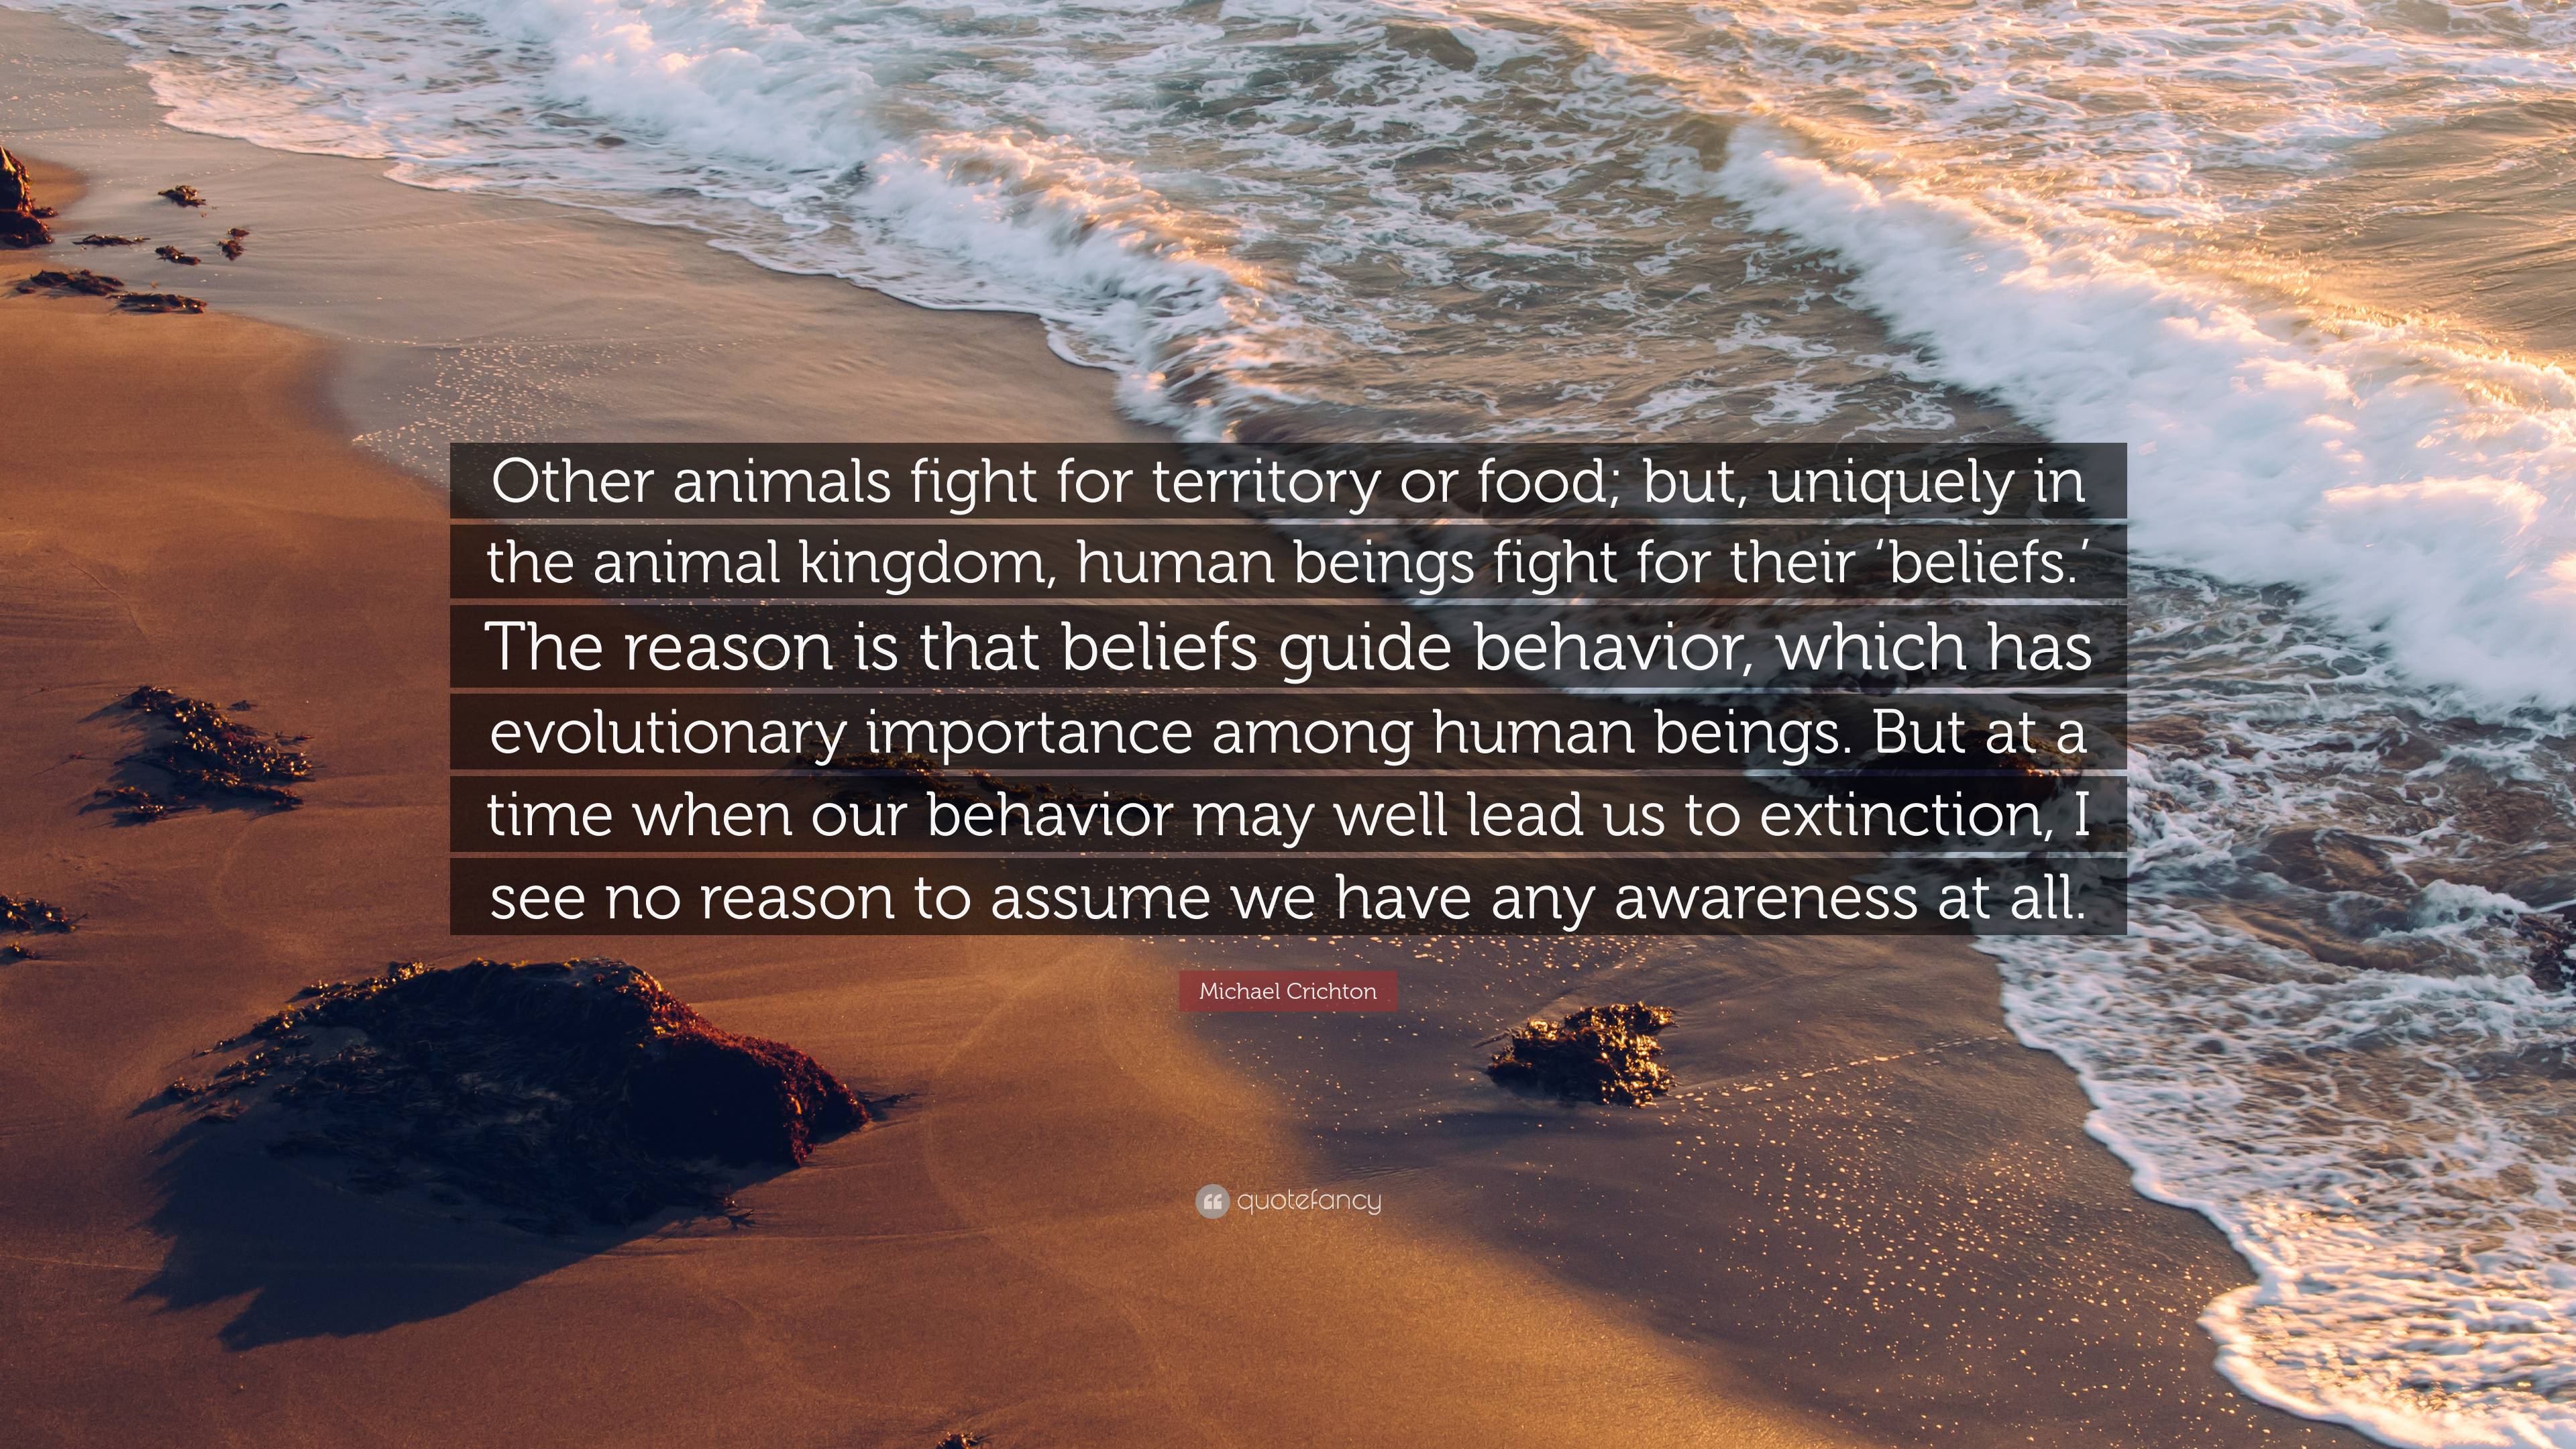 Michael Crichton Quote: “Other animals fight for territory or food; but,  uniquely in the animal kingdom, human beings fight for their 'beliefs.' ...”